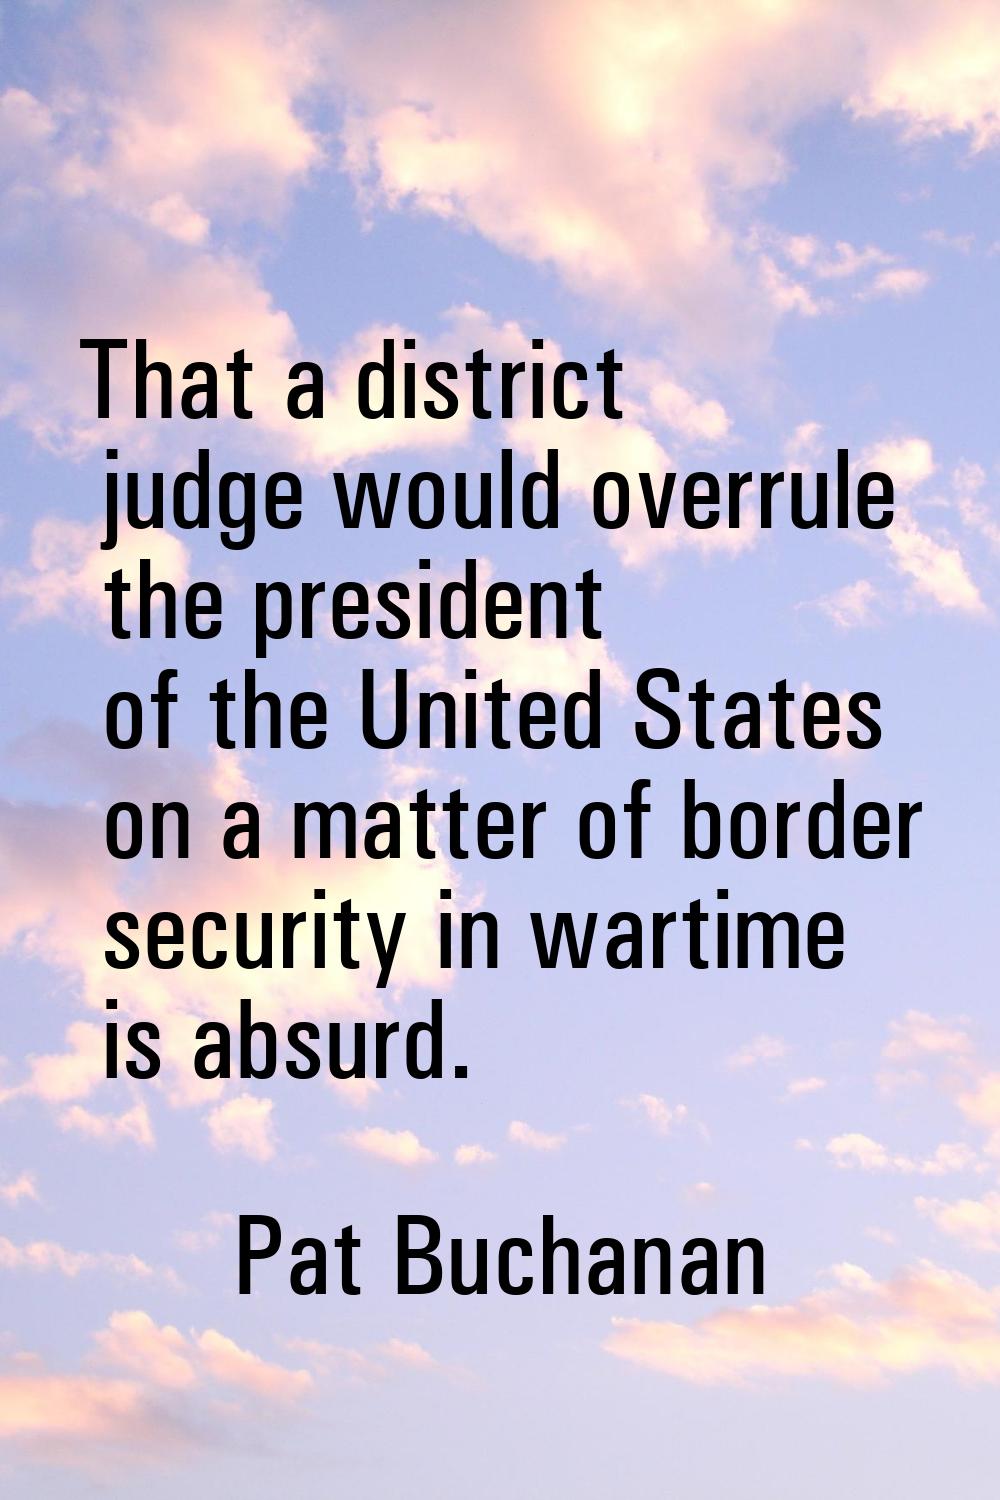 That a district judge would overrule the president of the United States on a matter of border secur